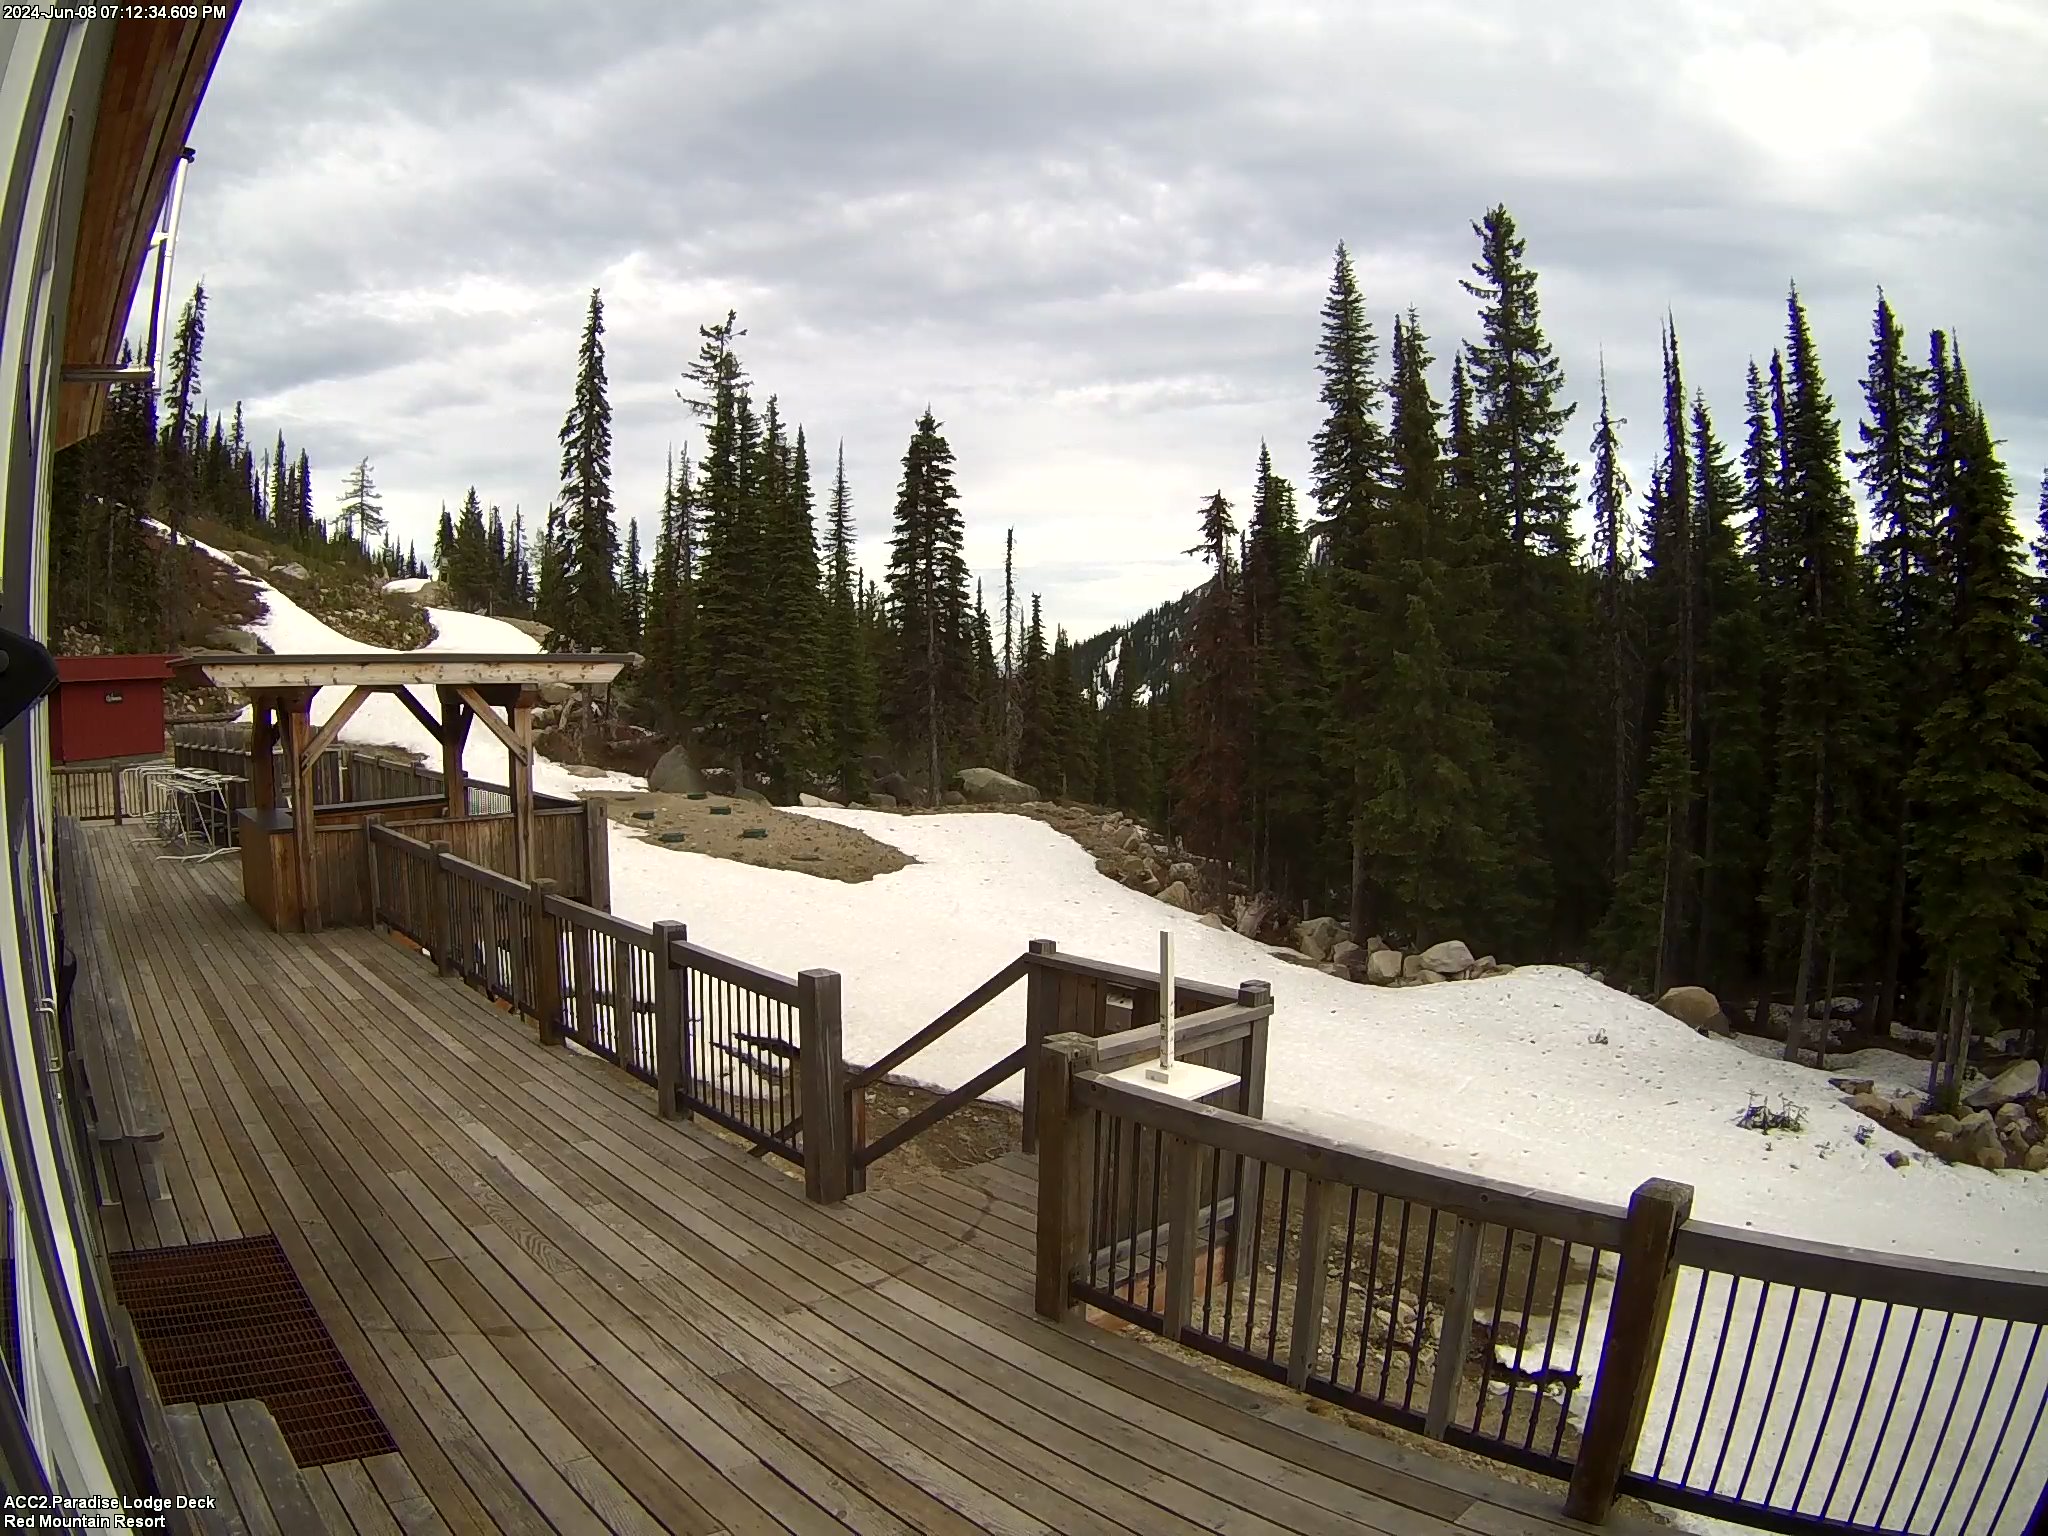 Paradise Lodge Deck Cam | Red Mountain cams